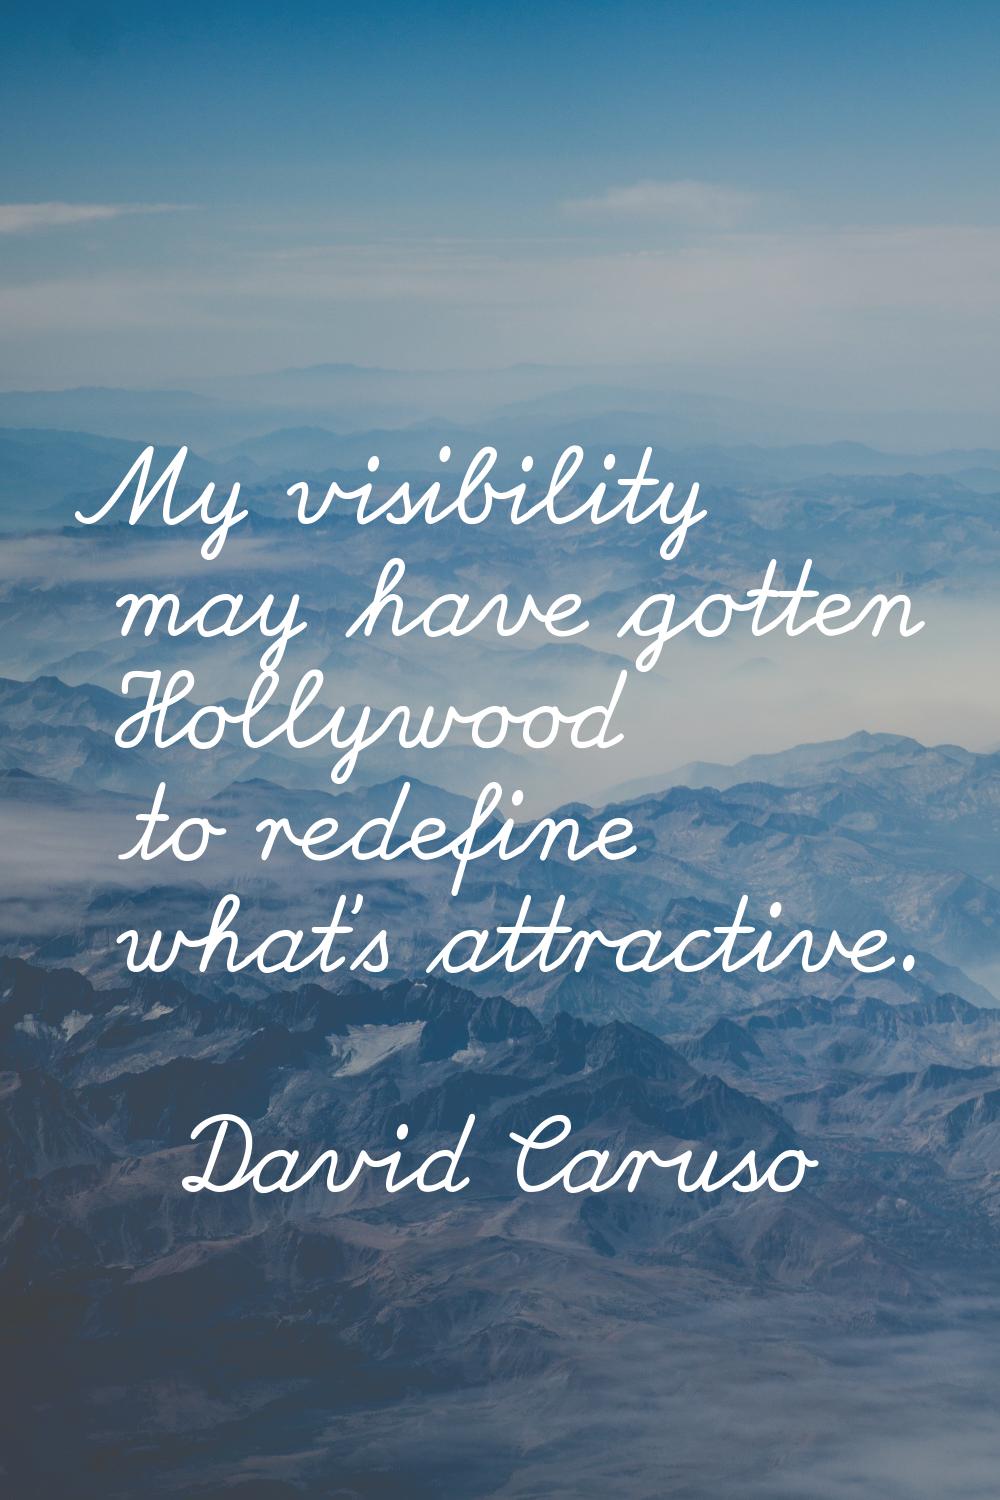 My visibility may have gotten Hollywood to redefine what's attractive.